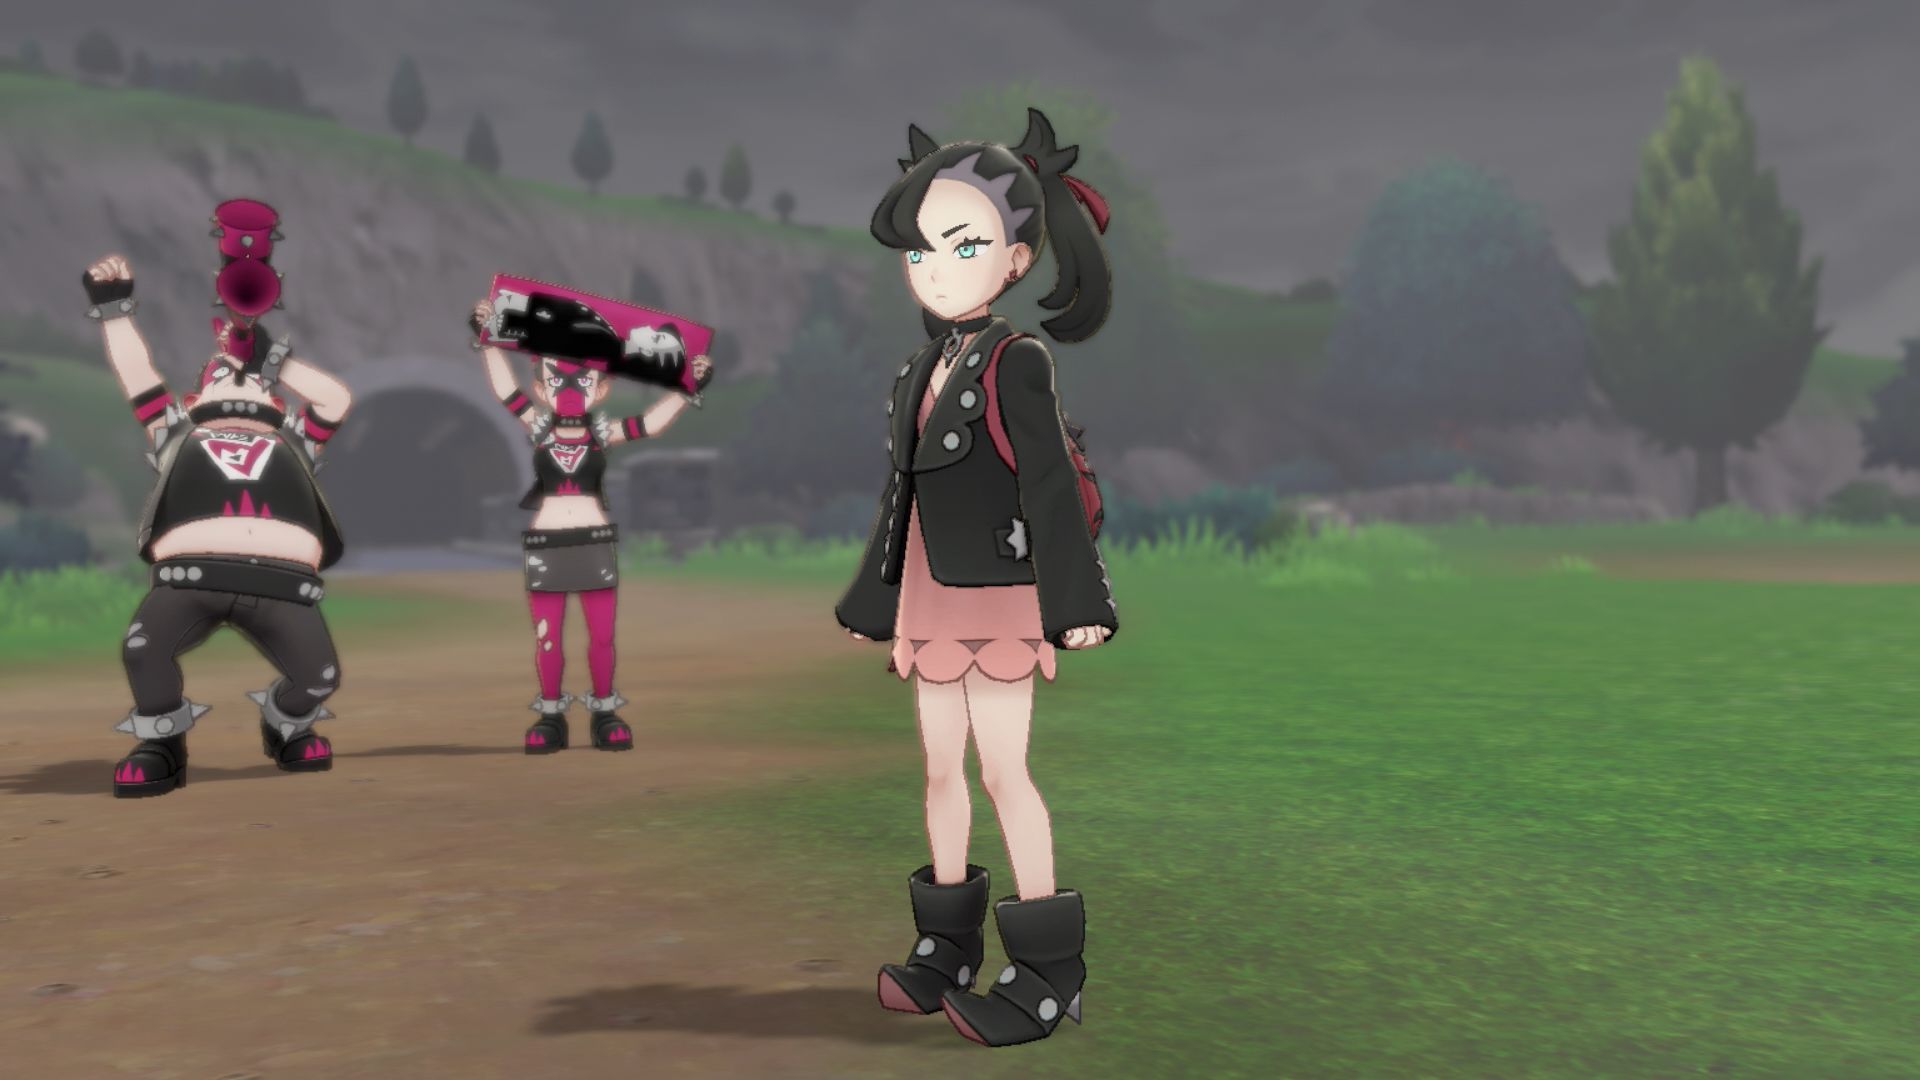 Bede and Marnie are your new rivals in Pokémon Sword and Shield